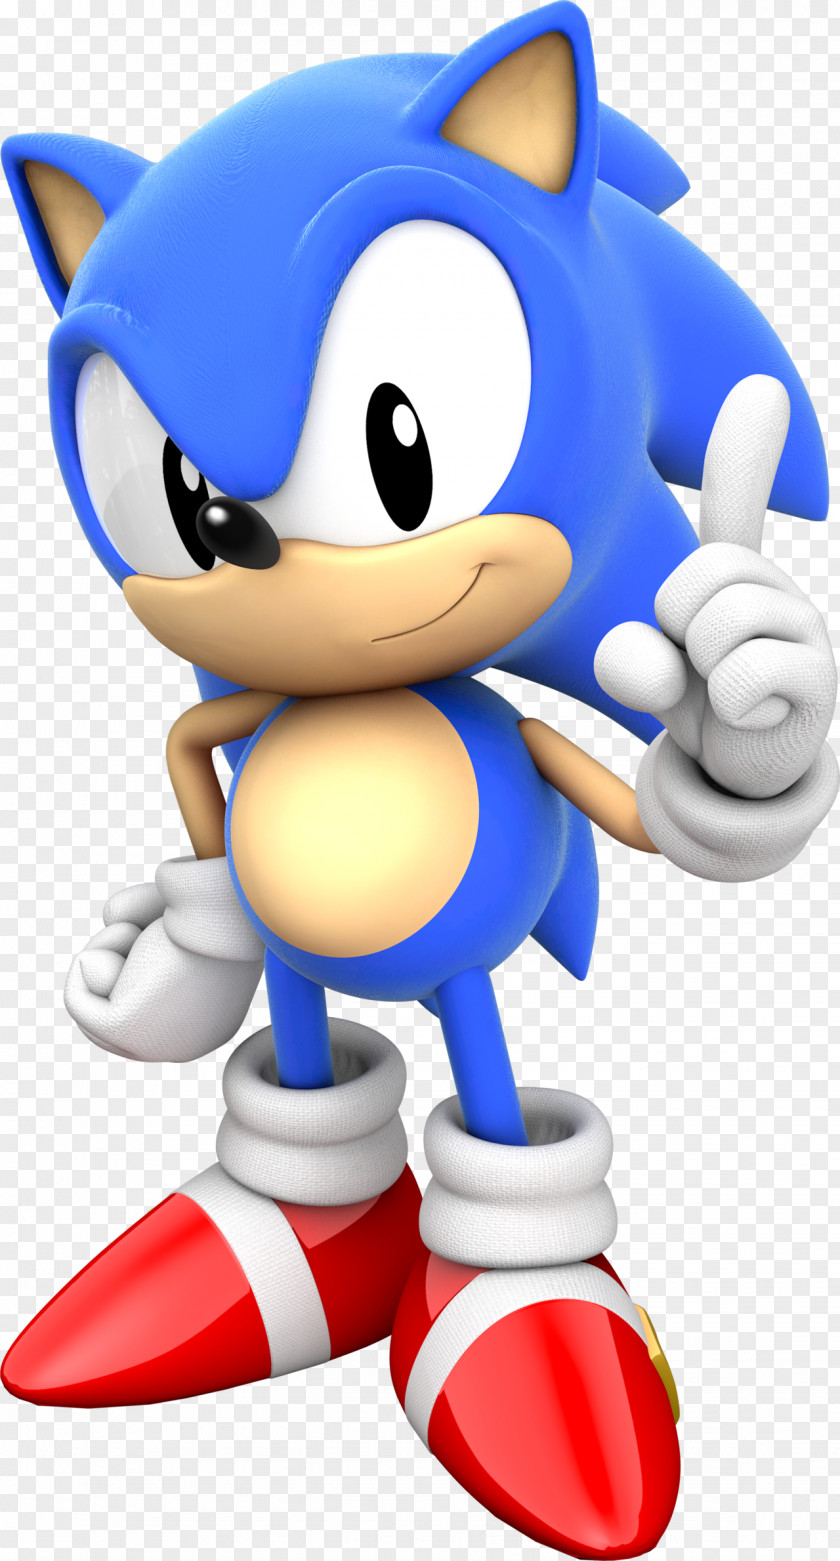 Sonic The Hedgehog 2 Mania Five Nights At Freddy's Video Game PNG